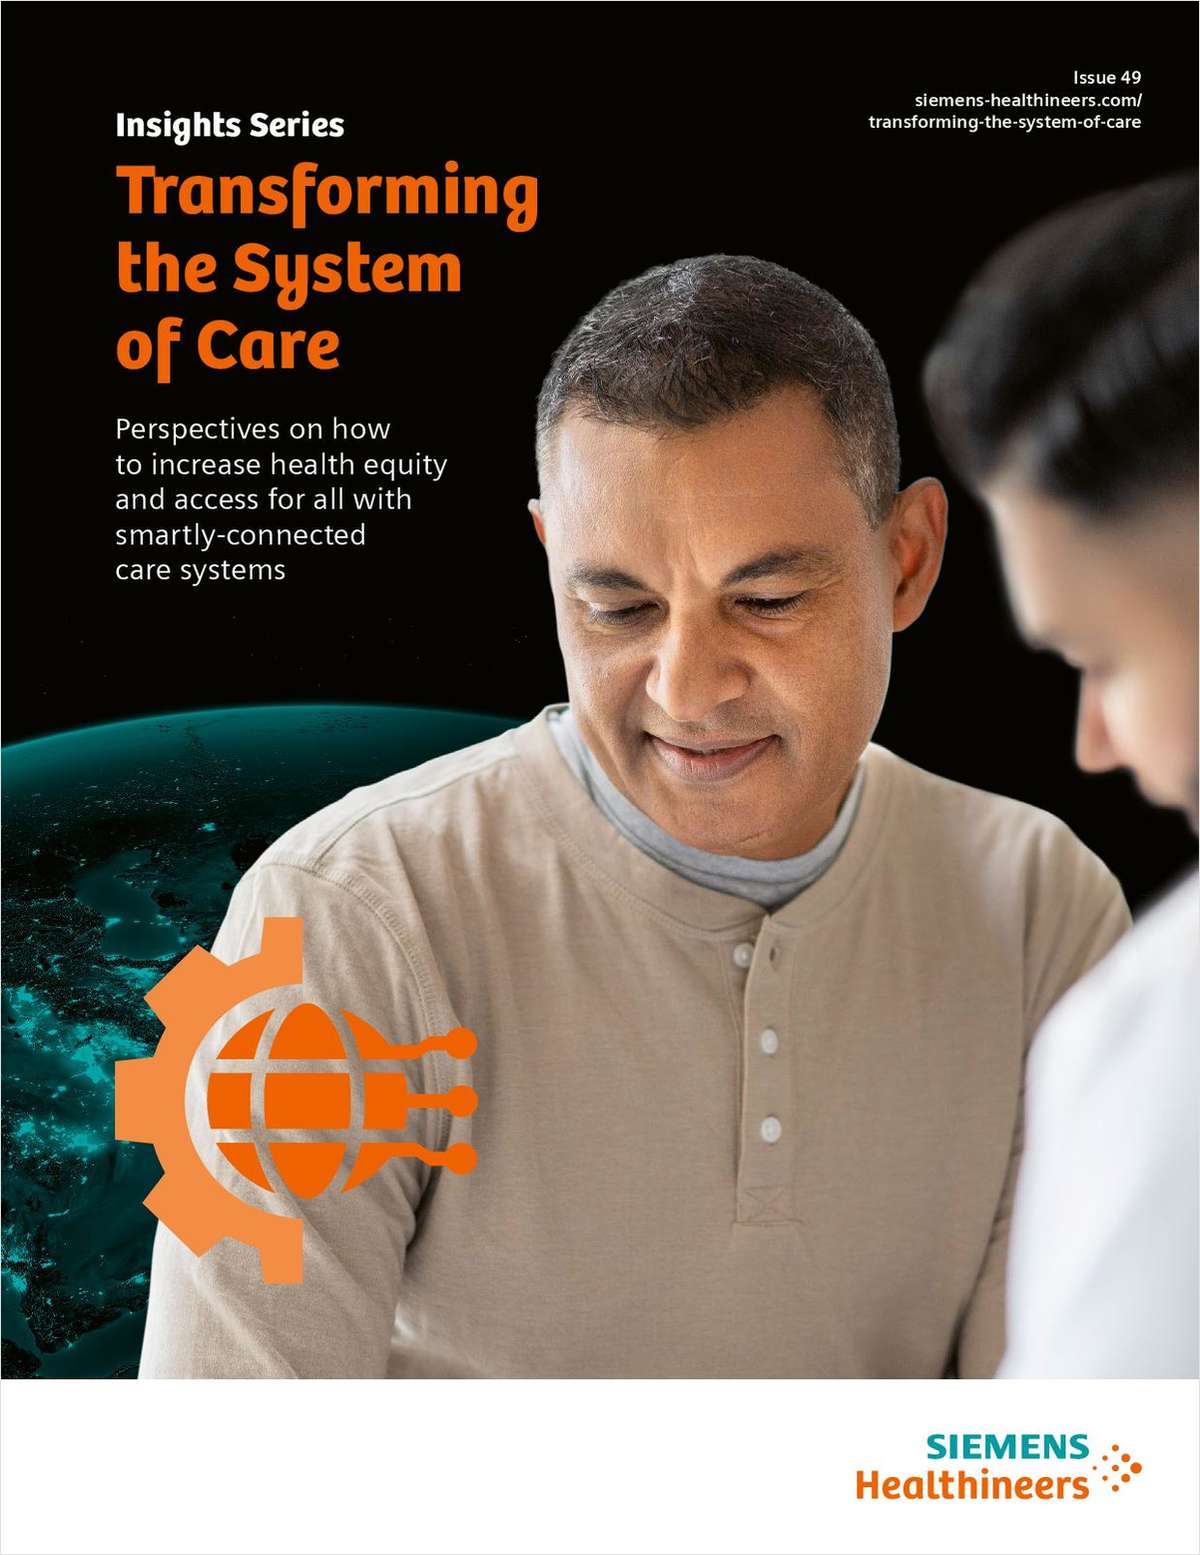 Transforming the system of care